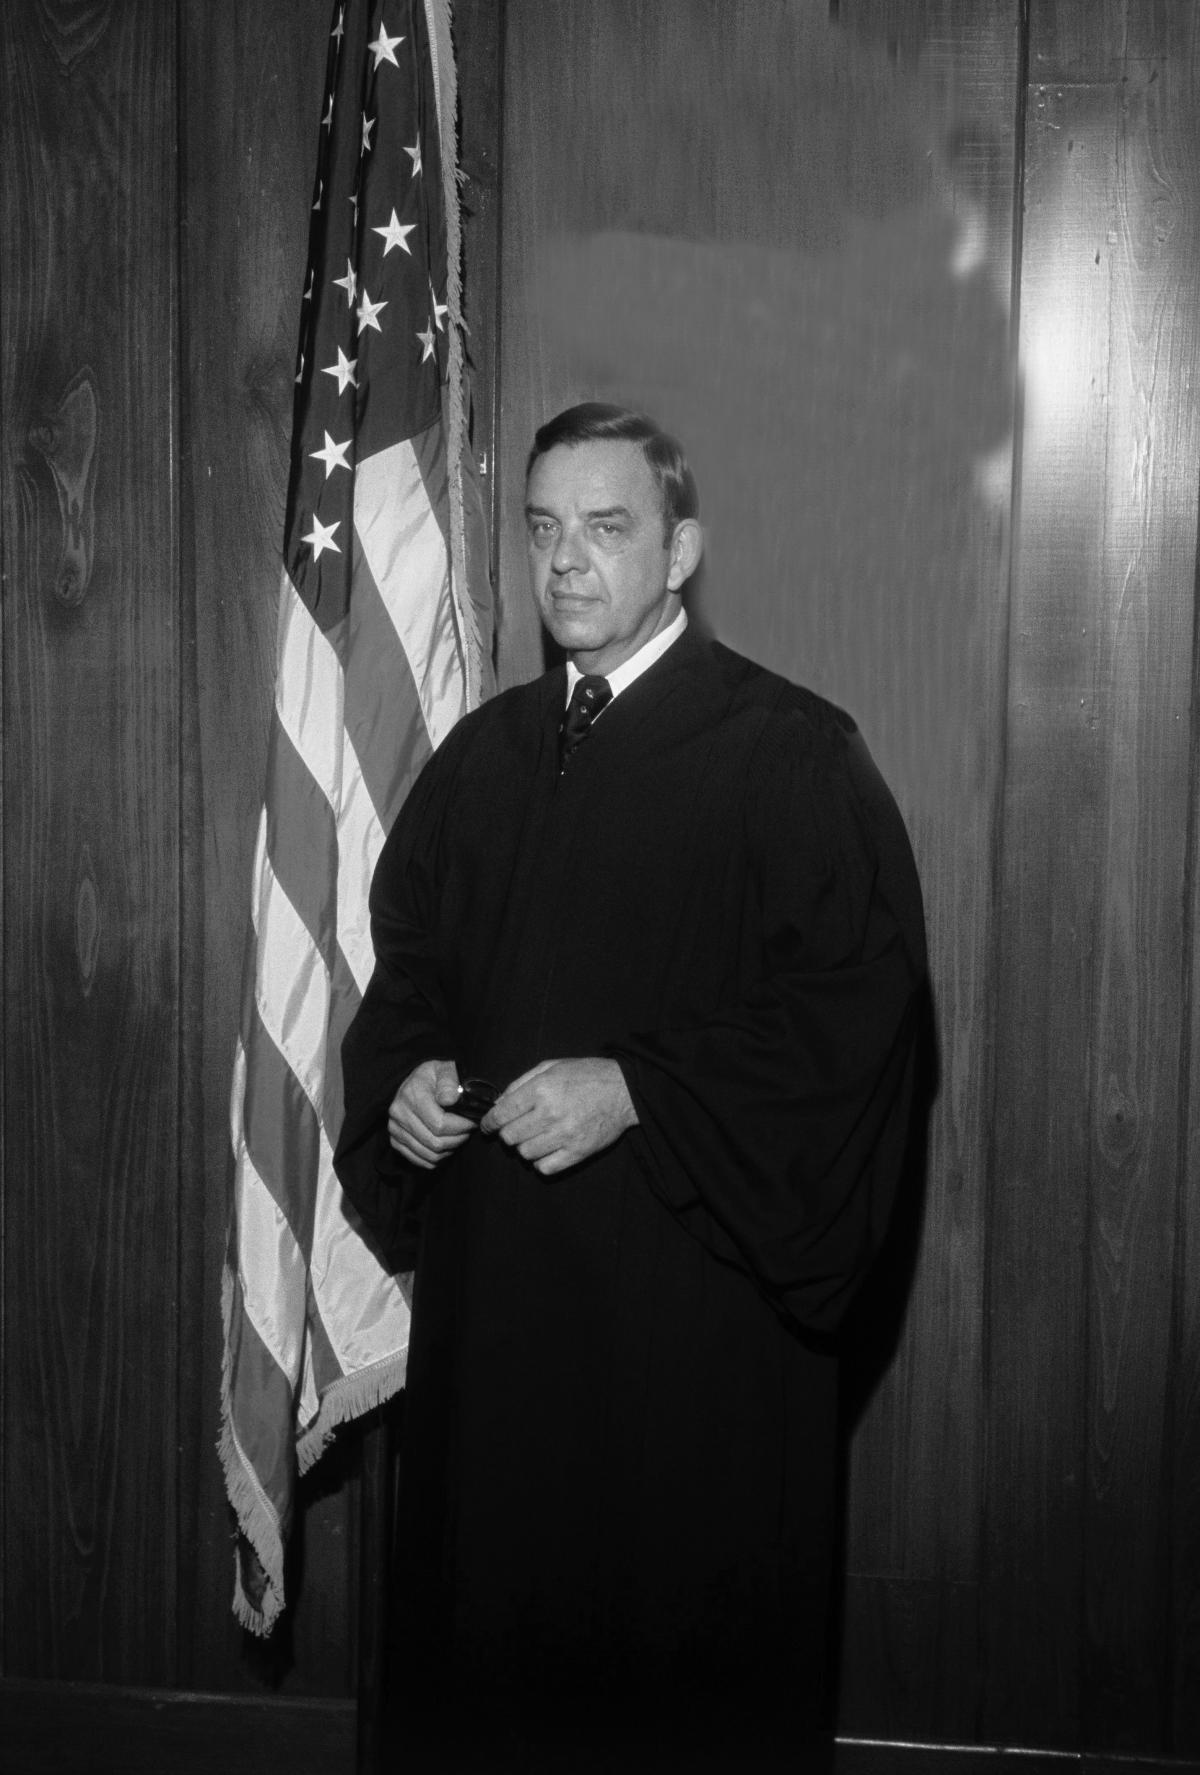 Carswell wearing judge's robes, standing in front of the American flag